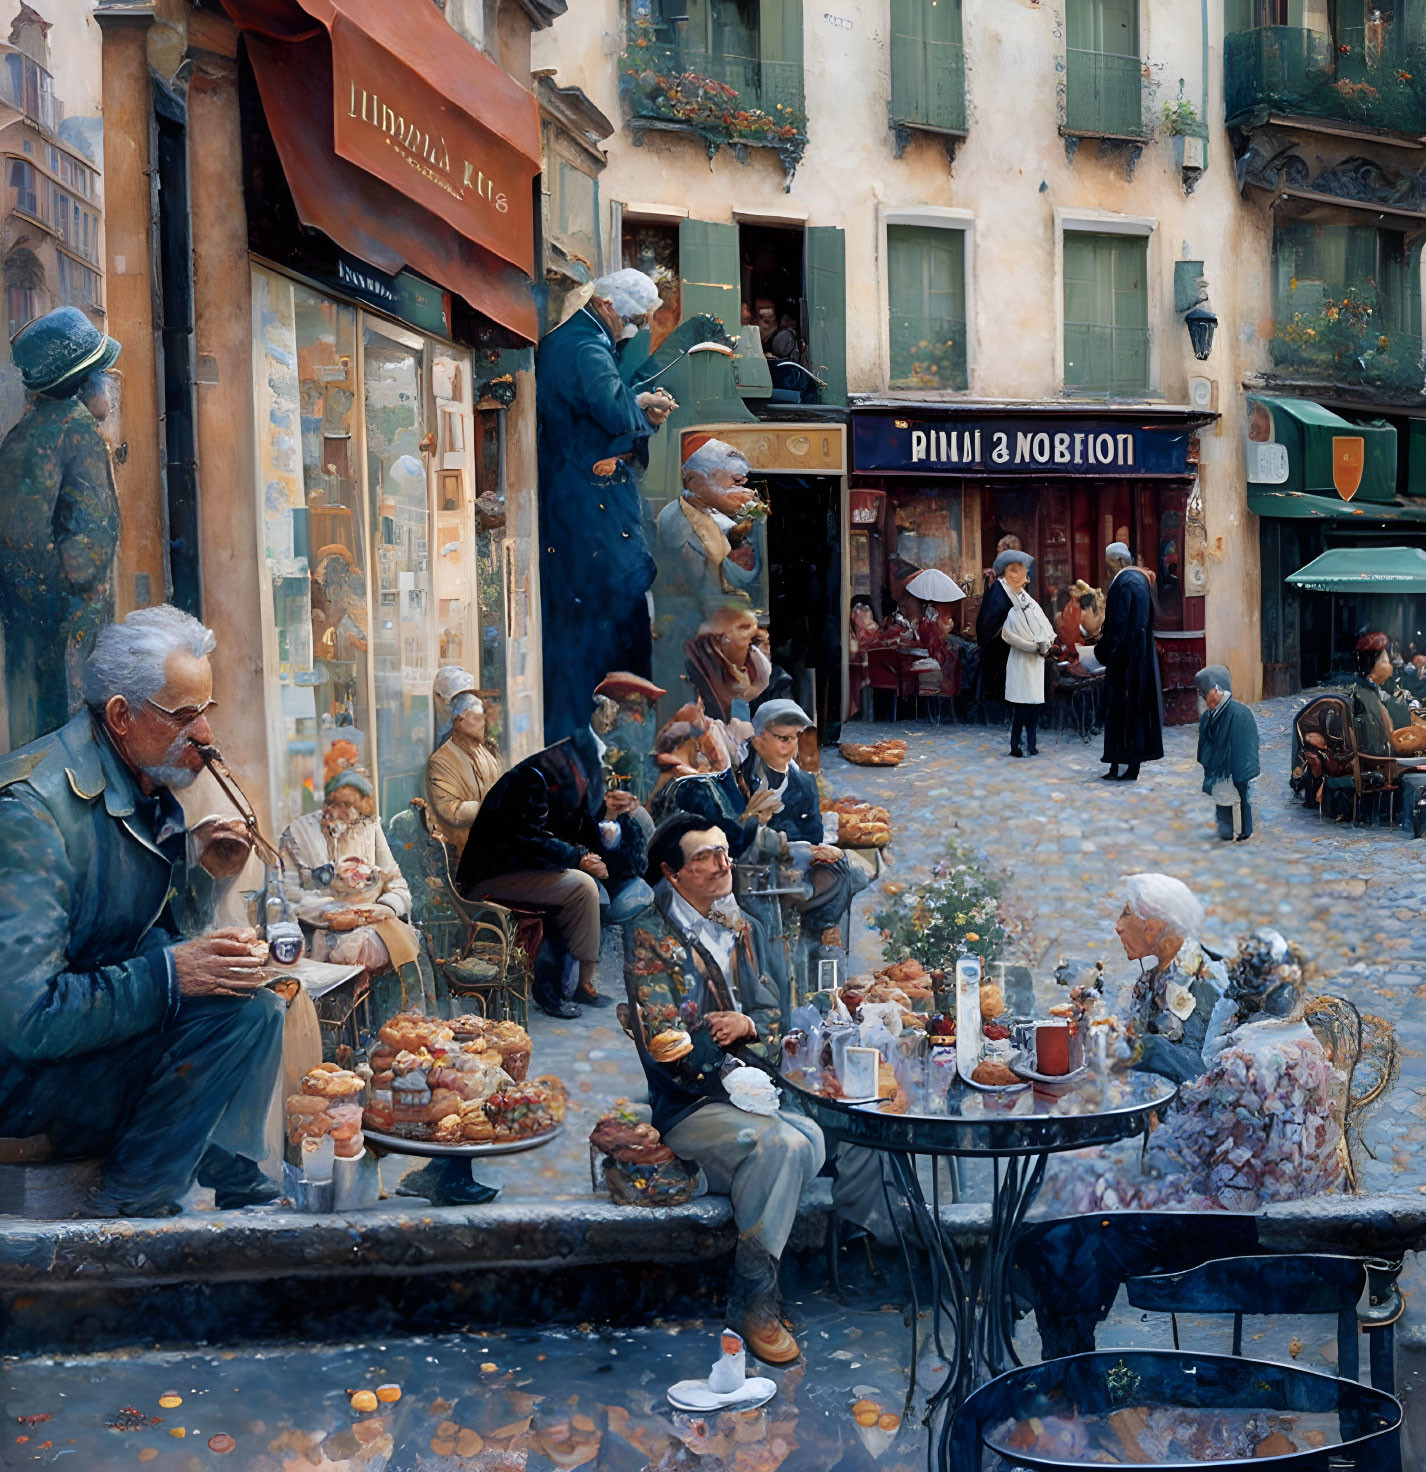 Outdoor Street Café Scene with Cobblestone Street, Bookstore, Pastries, and Flowers